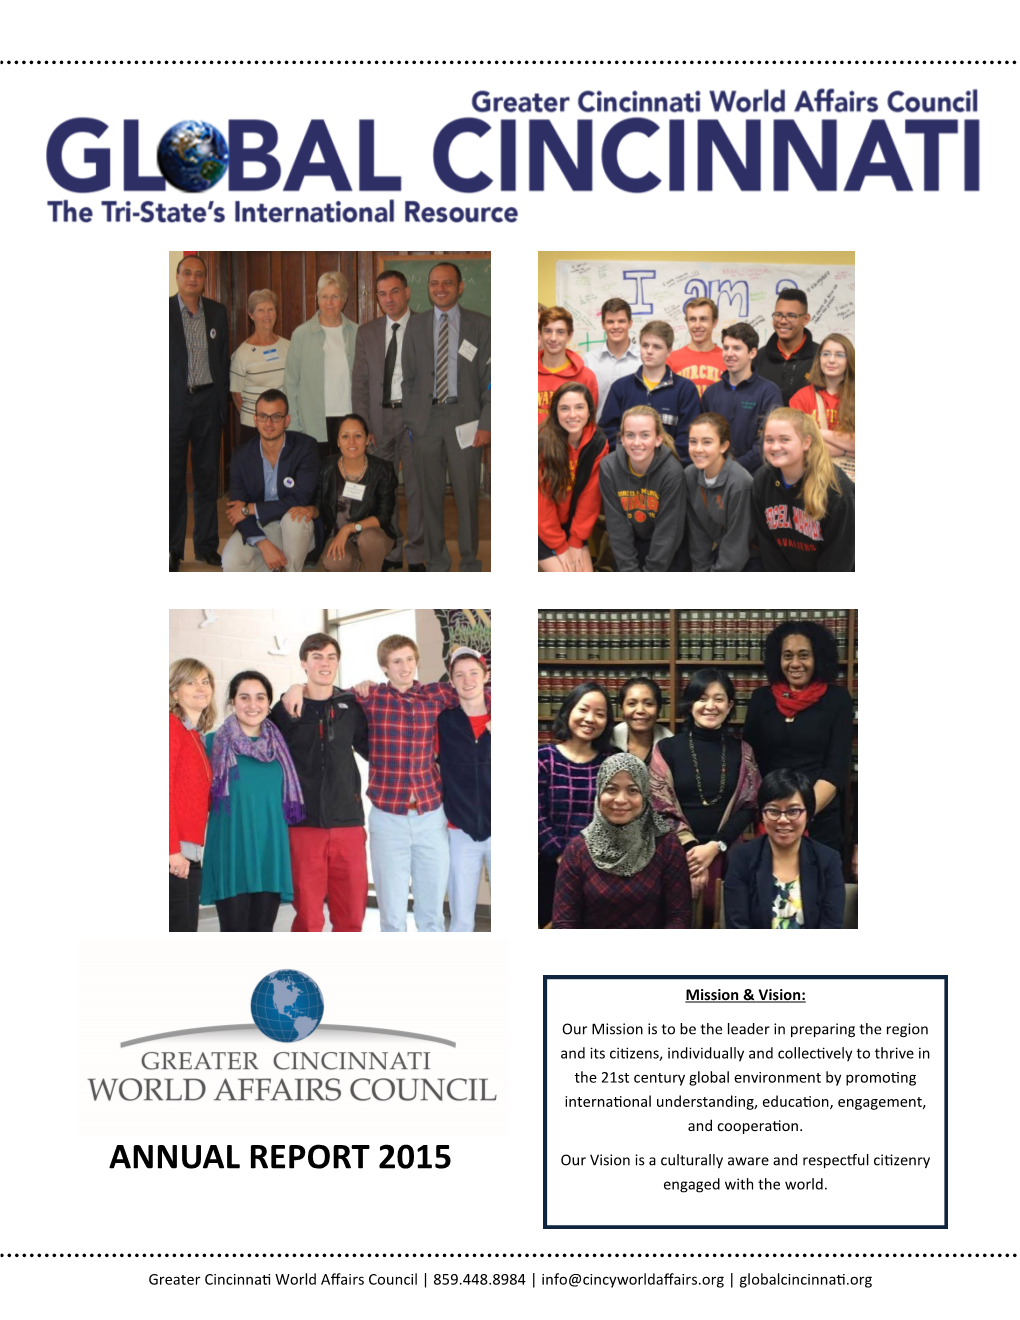 ANNUAL REPORT 2015 Our Vision Is a Culturally Aware and Respectful Citizenry Engaged with the World